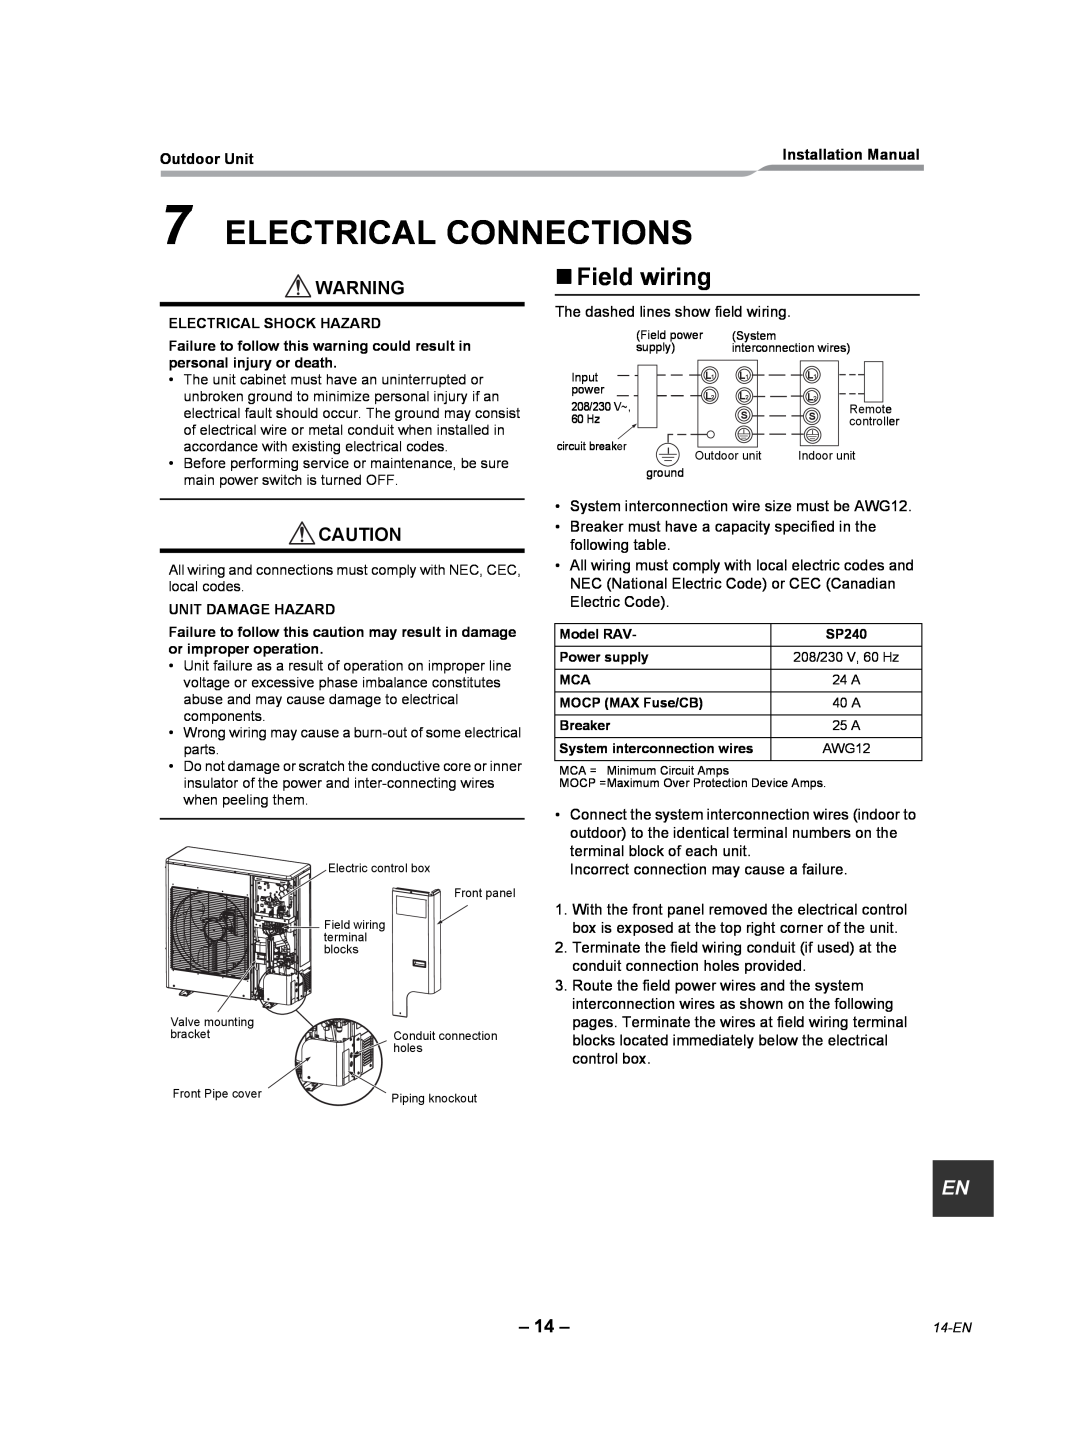 Toshiba RAV-SP240AT2-UL installation manual Electrical Connections, „Field wiring 